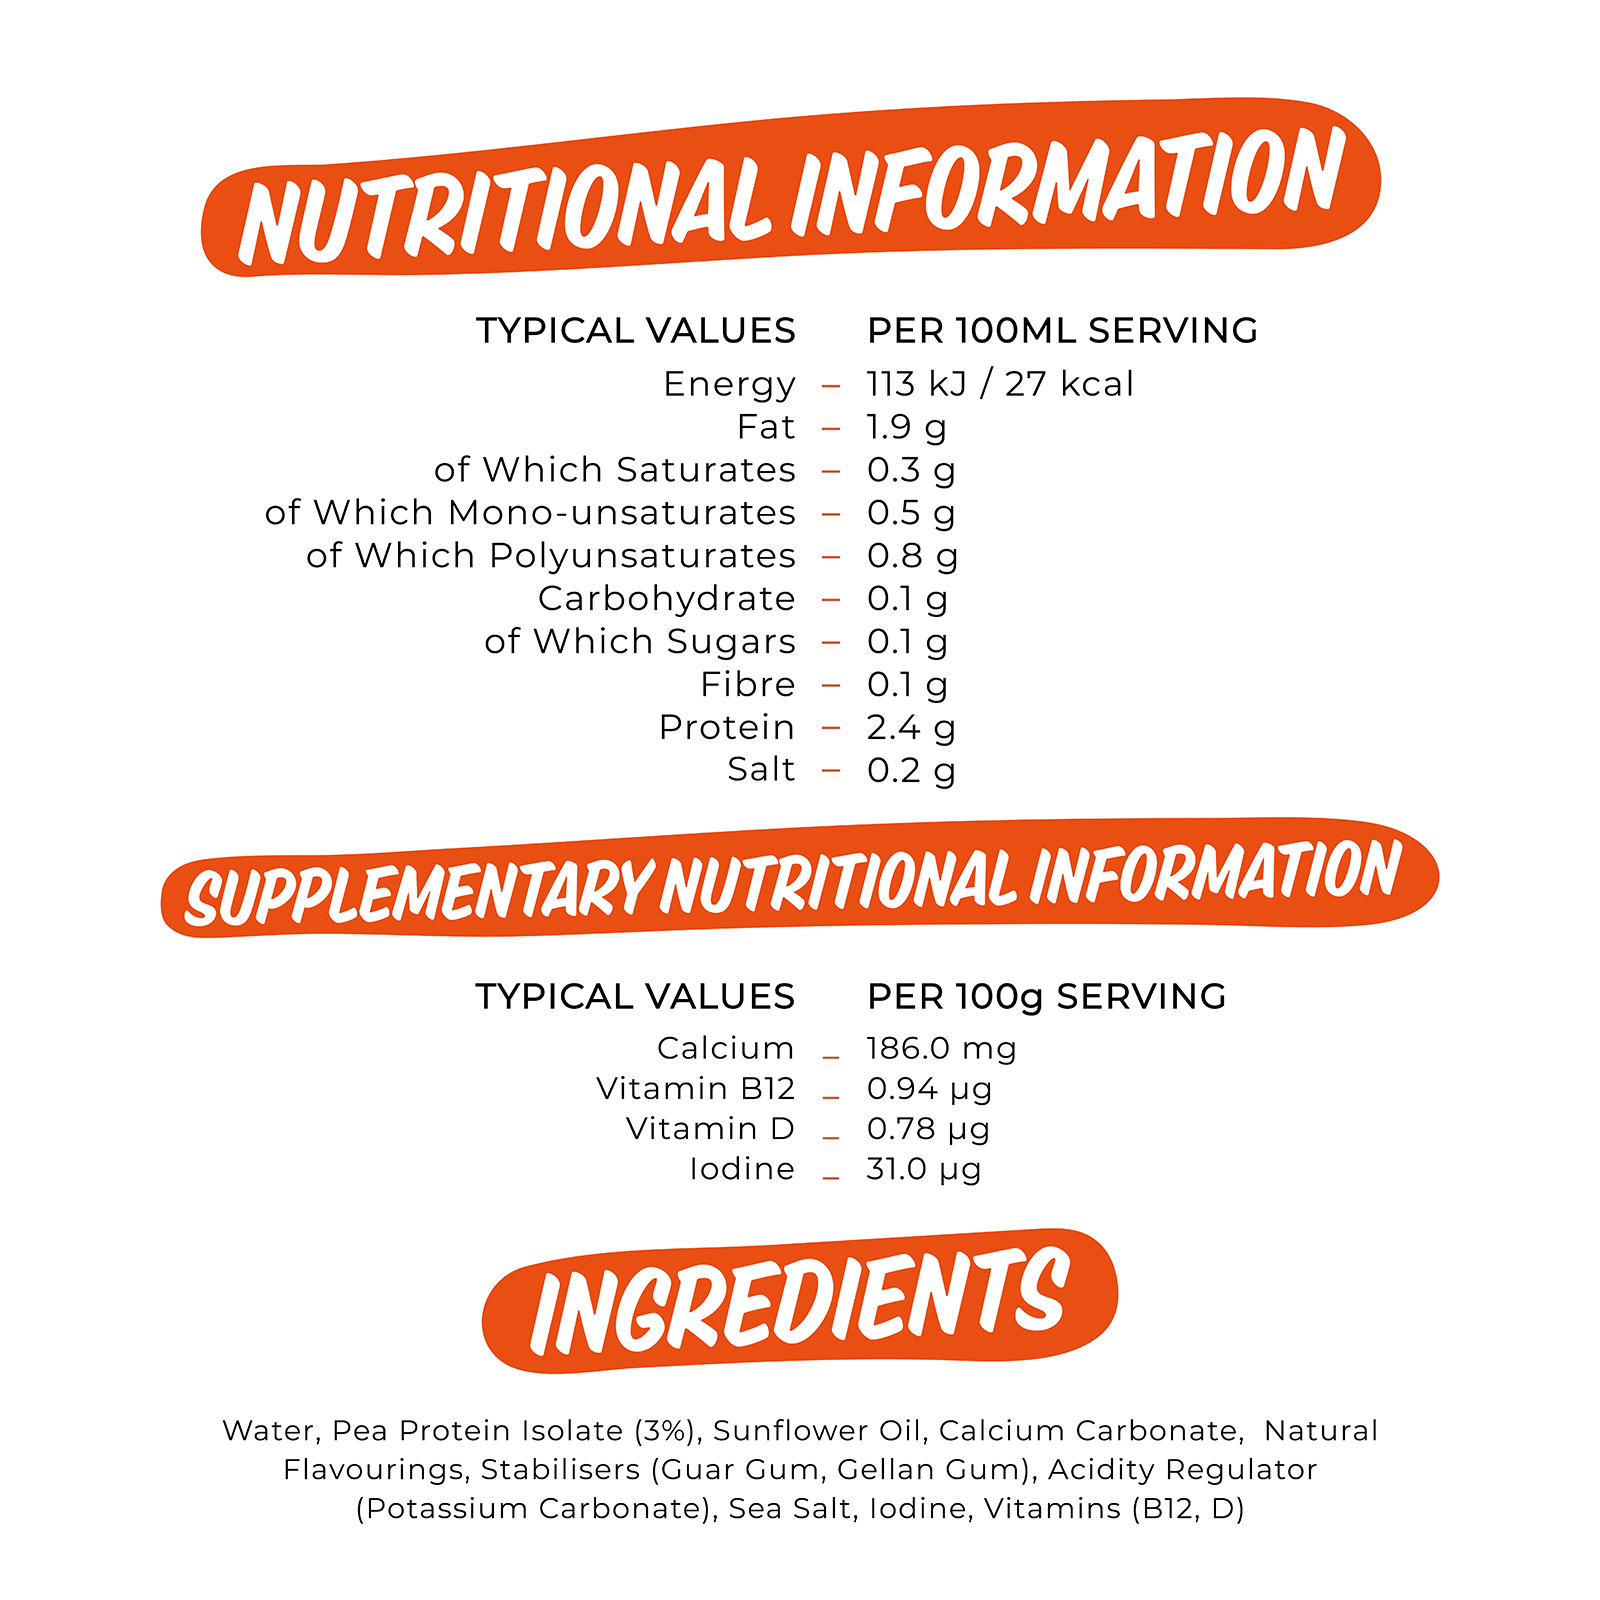 

                          TYPICAL VALUES PER 100ML SERVING Energy 113 kJ / 27 kcal Fat 1.9 g of Which Saturates 0.3 g of Which Mono-unsaturates 0.5 g of Which Polyunsaturates 0.8 g Carbohydrate 0.1 g of Which Sugars 0.1 g Fibre 0.1 g Protein 2.4 g Salt 0.2 g 
                          L'UPPLEMENTARY NUTRITIONAL INFORMATION 
                          TYPICAL VALUES PER 100g SERVING Calcium _ 186.0 mg Vitamin B12 _ 0.94 pg Vitamin D _ 0.78 pg Iodine _ 31.0 pg 

                          Water, Pea Protein Isolate (3%), Sunflower Oil, Calcium Carbonate, Natural Flavourings, Stabilisers (Guar Gum, Gellan Gum), Acidity Regulator (Potassium Carbonate), Sea Salt, Iodine, Vitamins (B12, D) 

                          